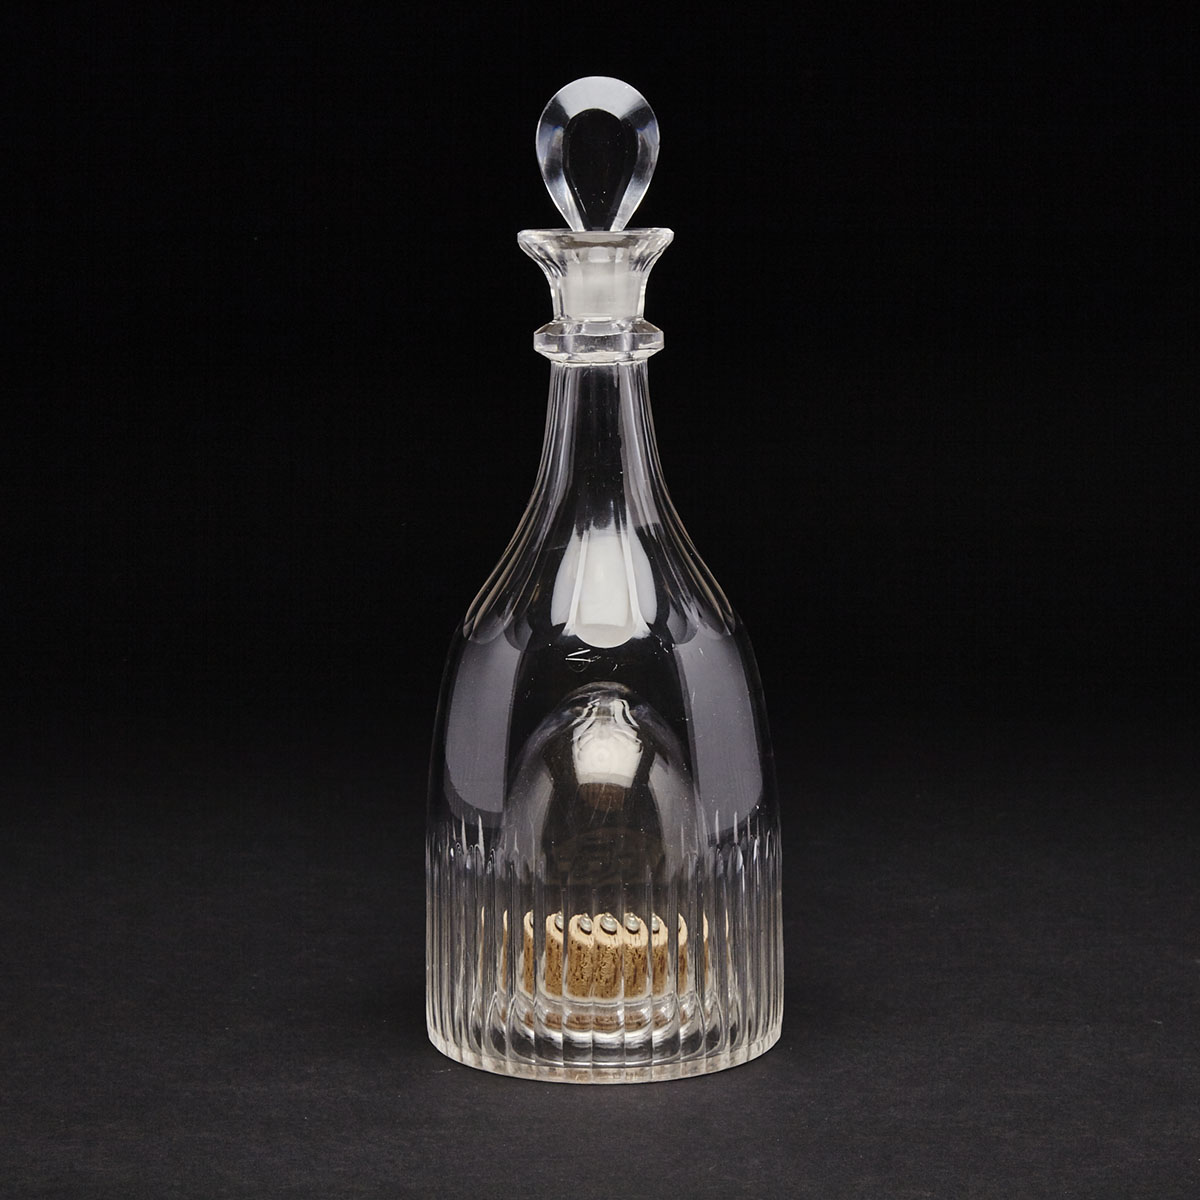 Unusual English Cut Glass Decanter with Ice Pocket, 19th century